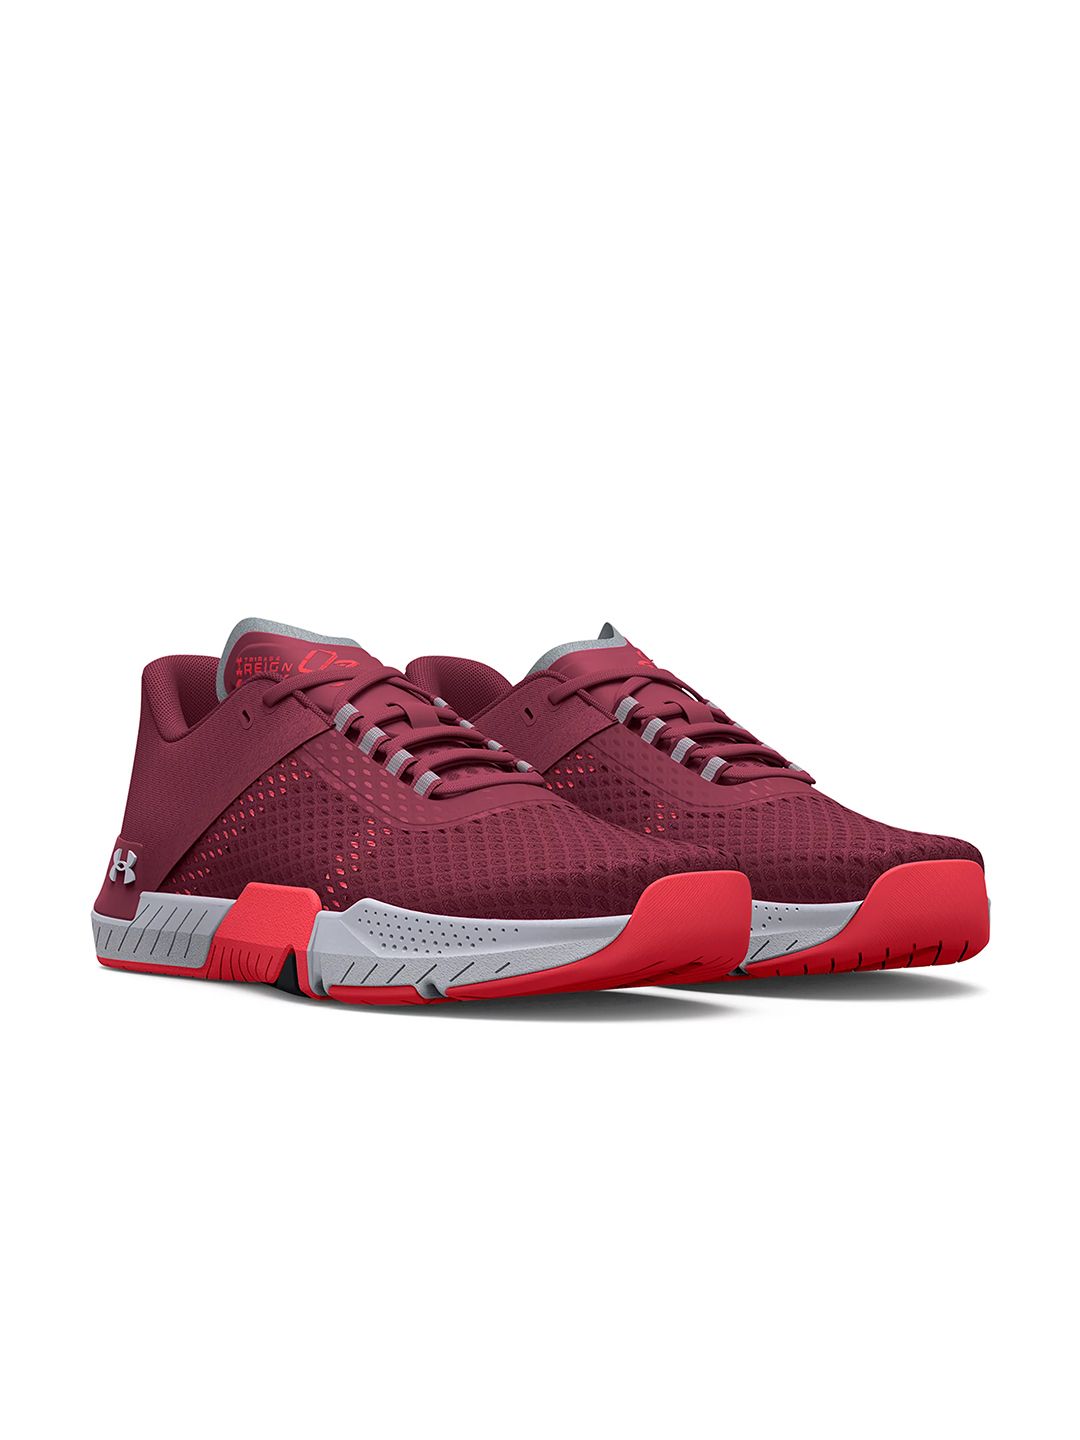 UNDER ARMOUR Women Maroon TriBase Reign 4 Training Shoes Price in India